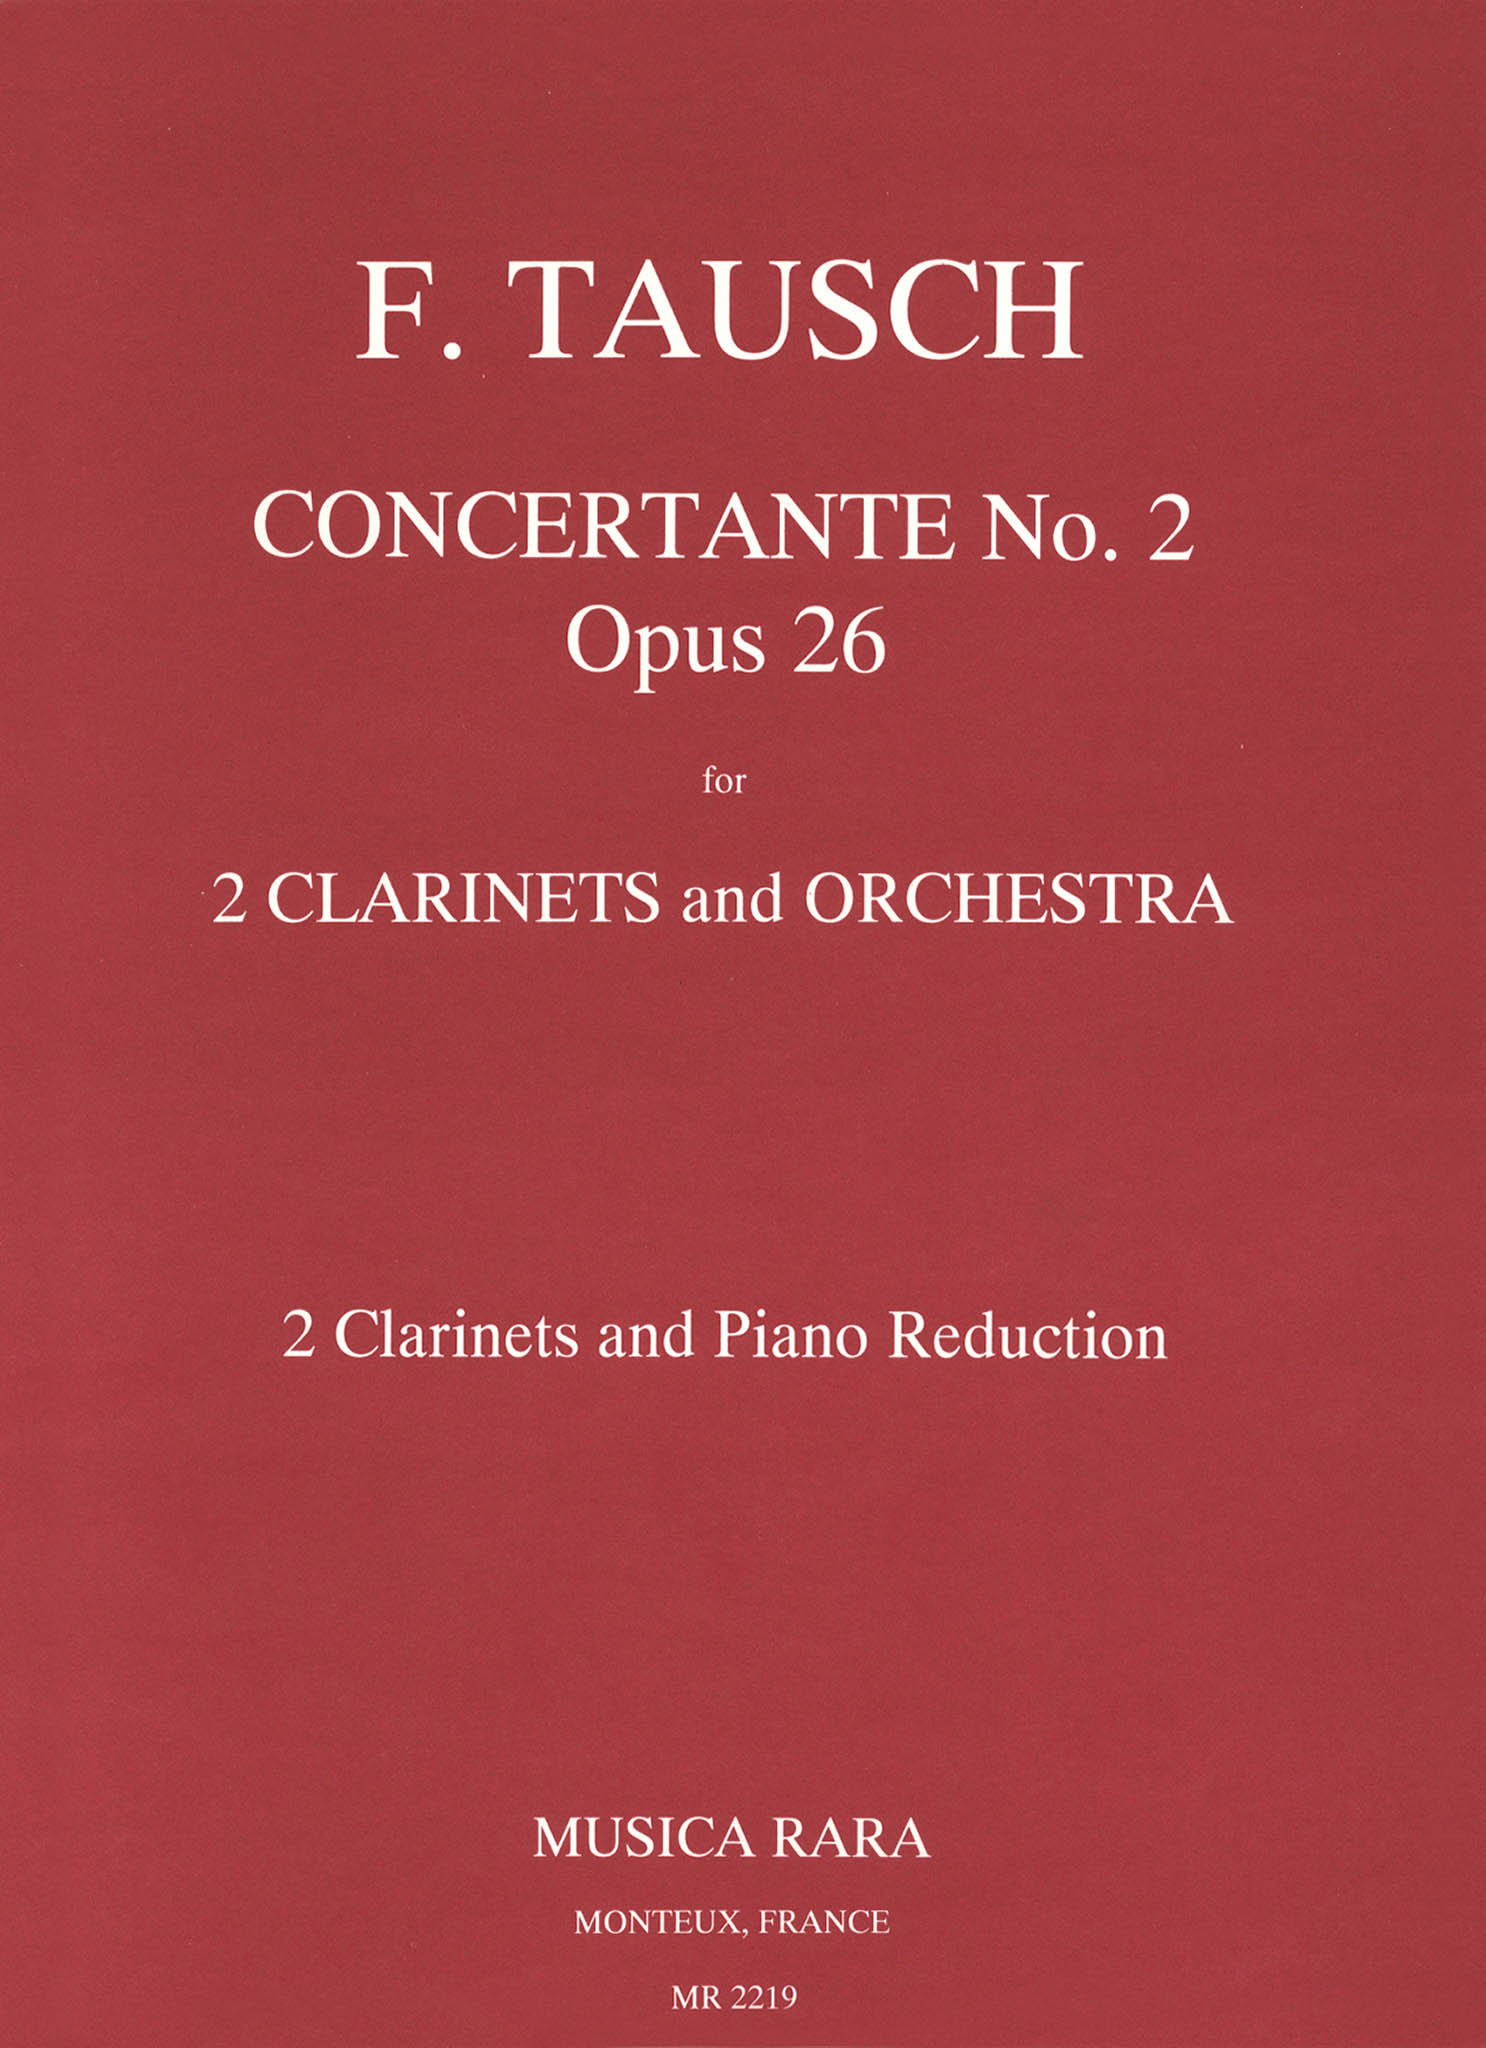 Franz Tausch Concertante No. 2, Op. 26 2 clarinets & orchestra piano reduction Cover